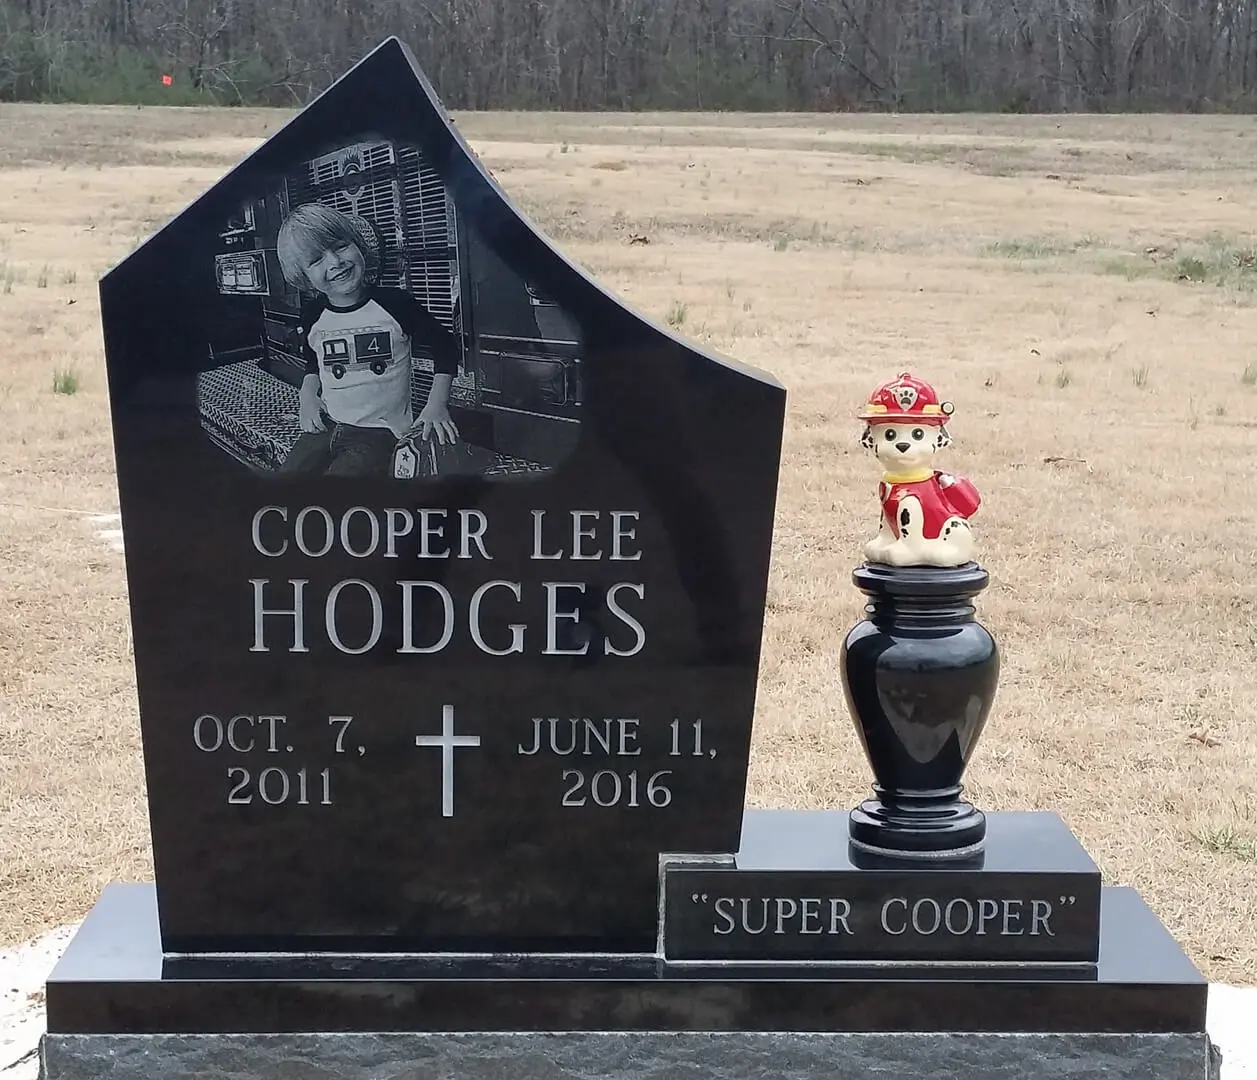 A memorial slab with the name Copper Lee Hodges